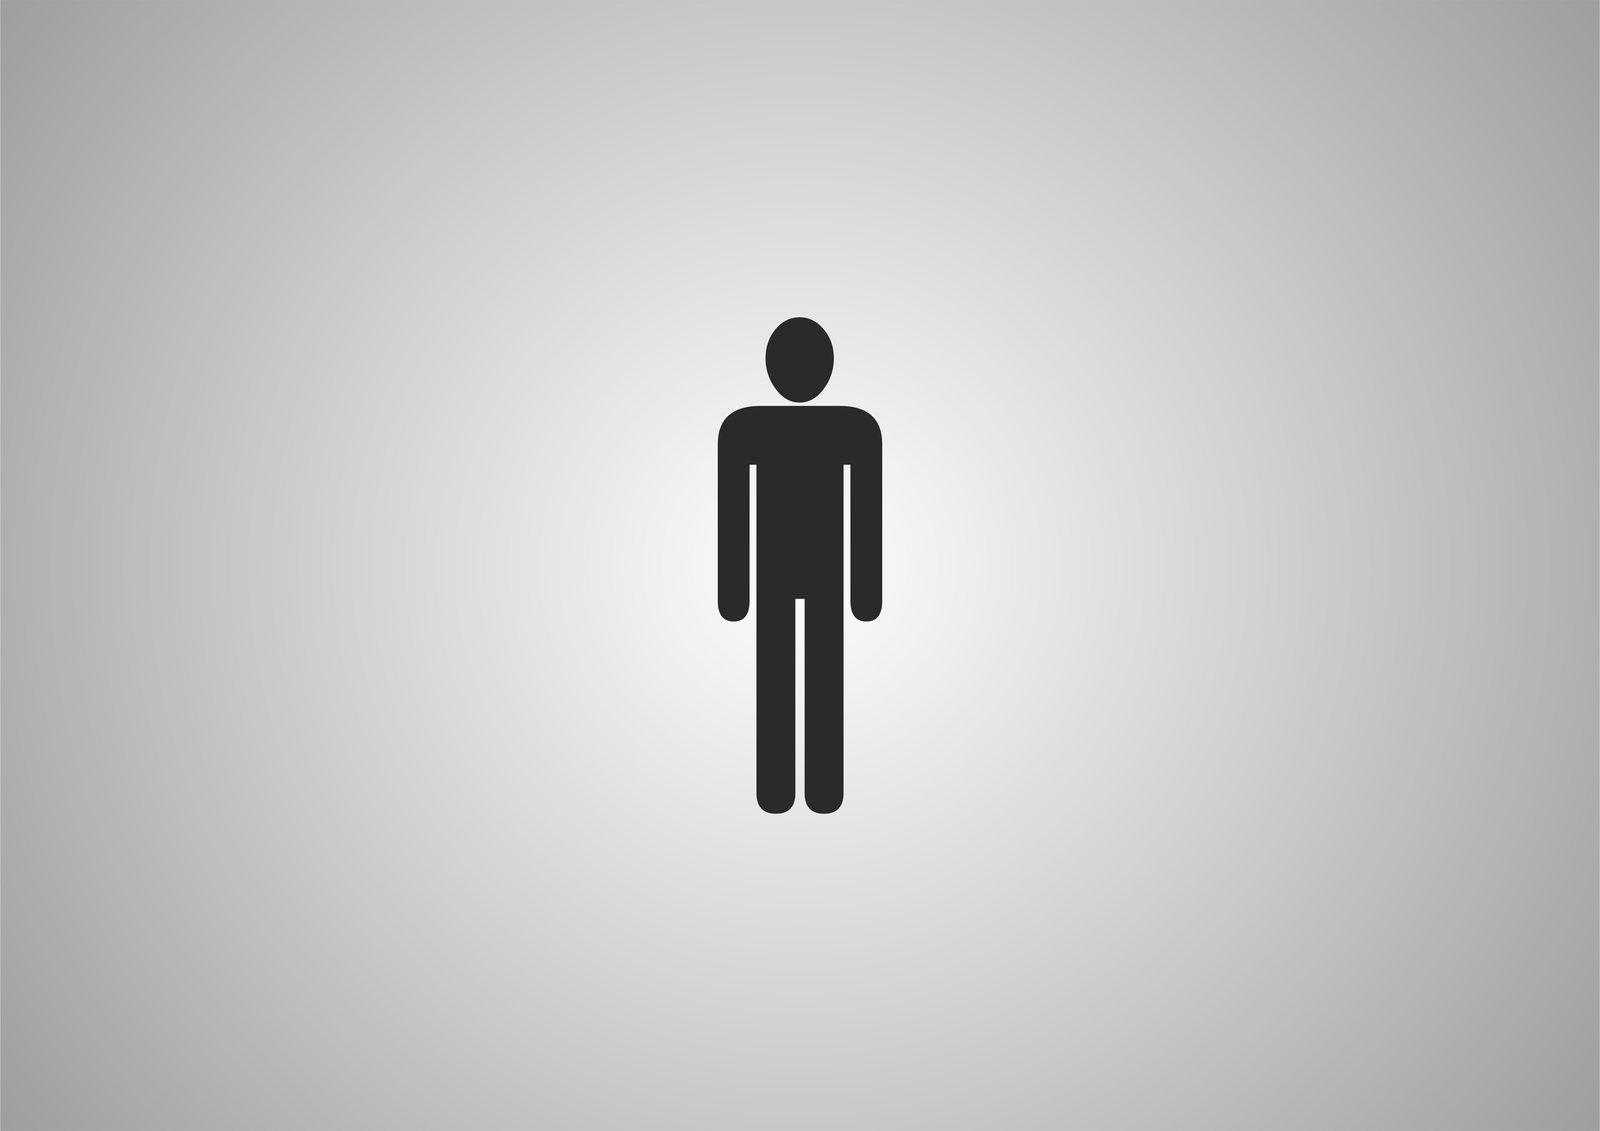 a man's avatar is standing in the same spot as an object